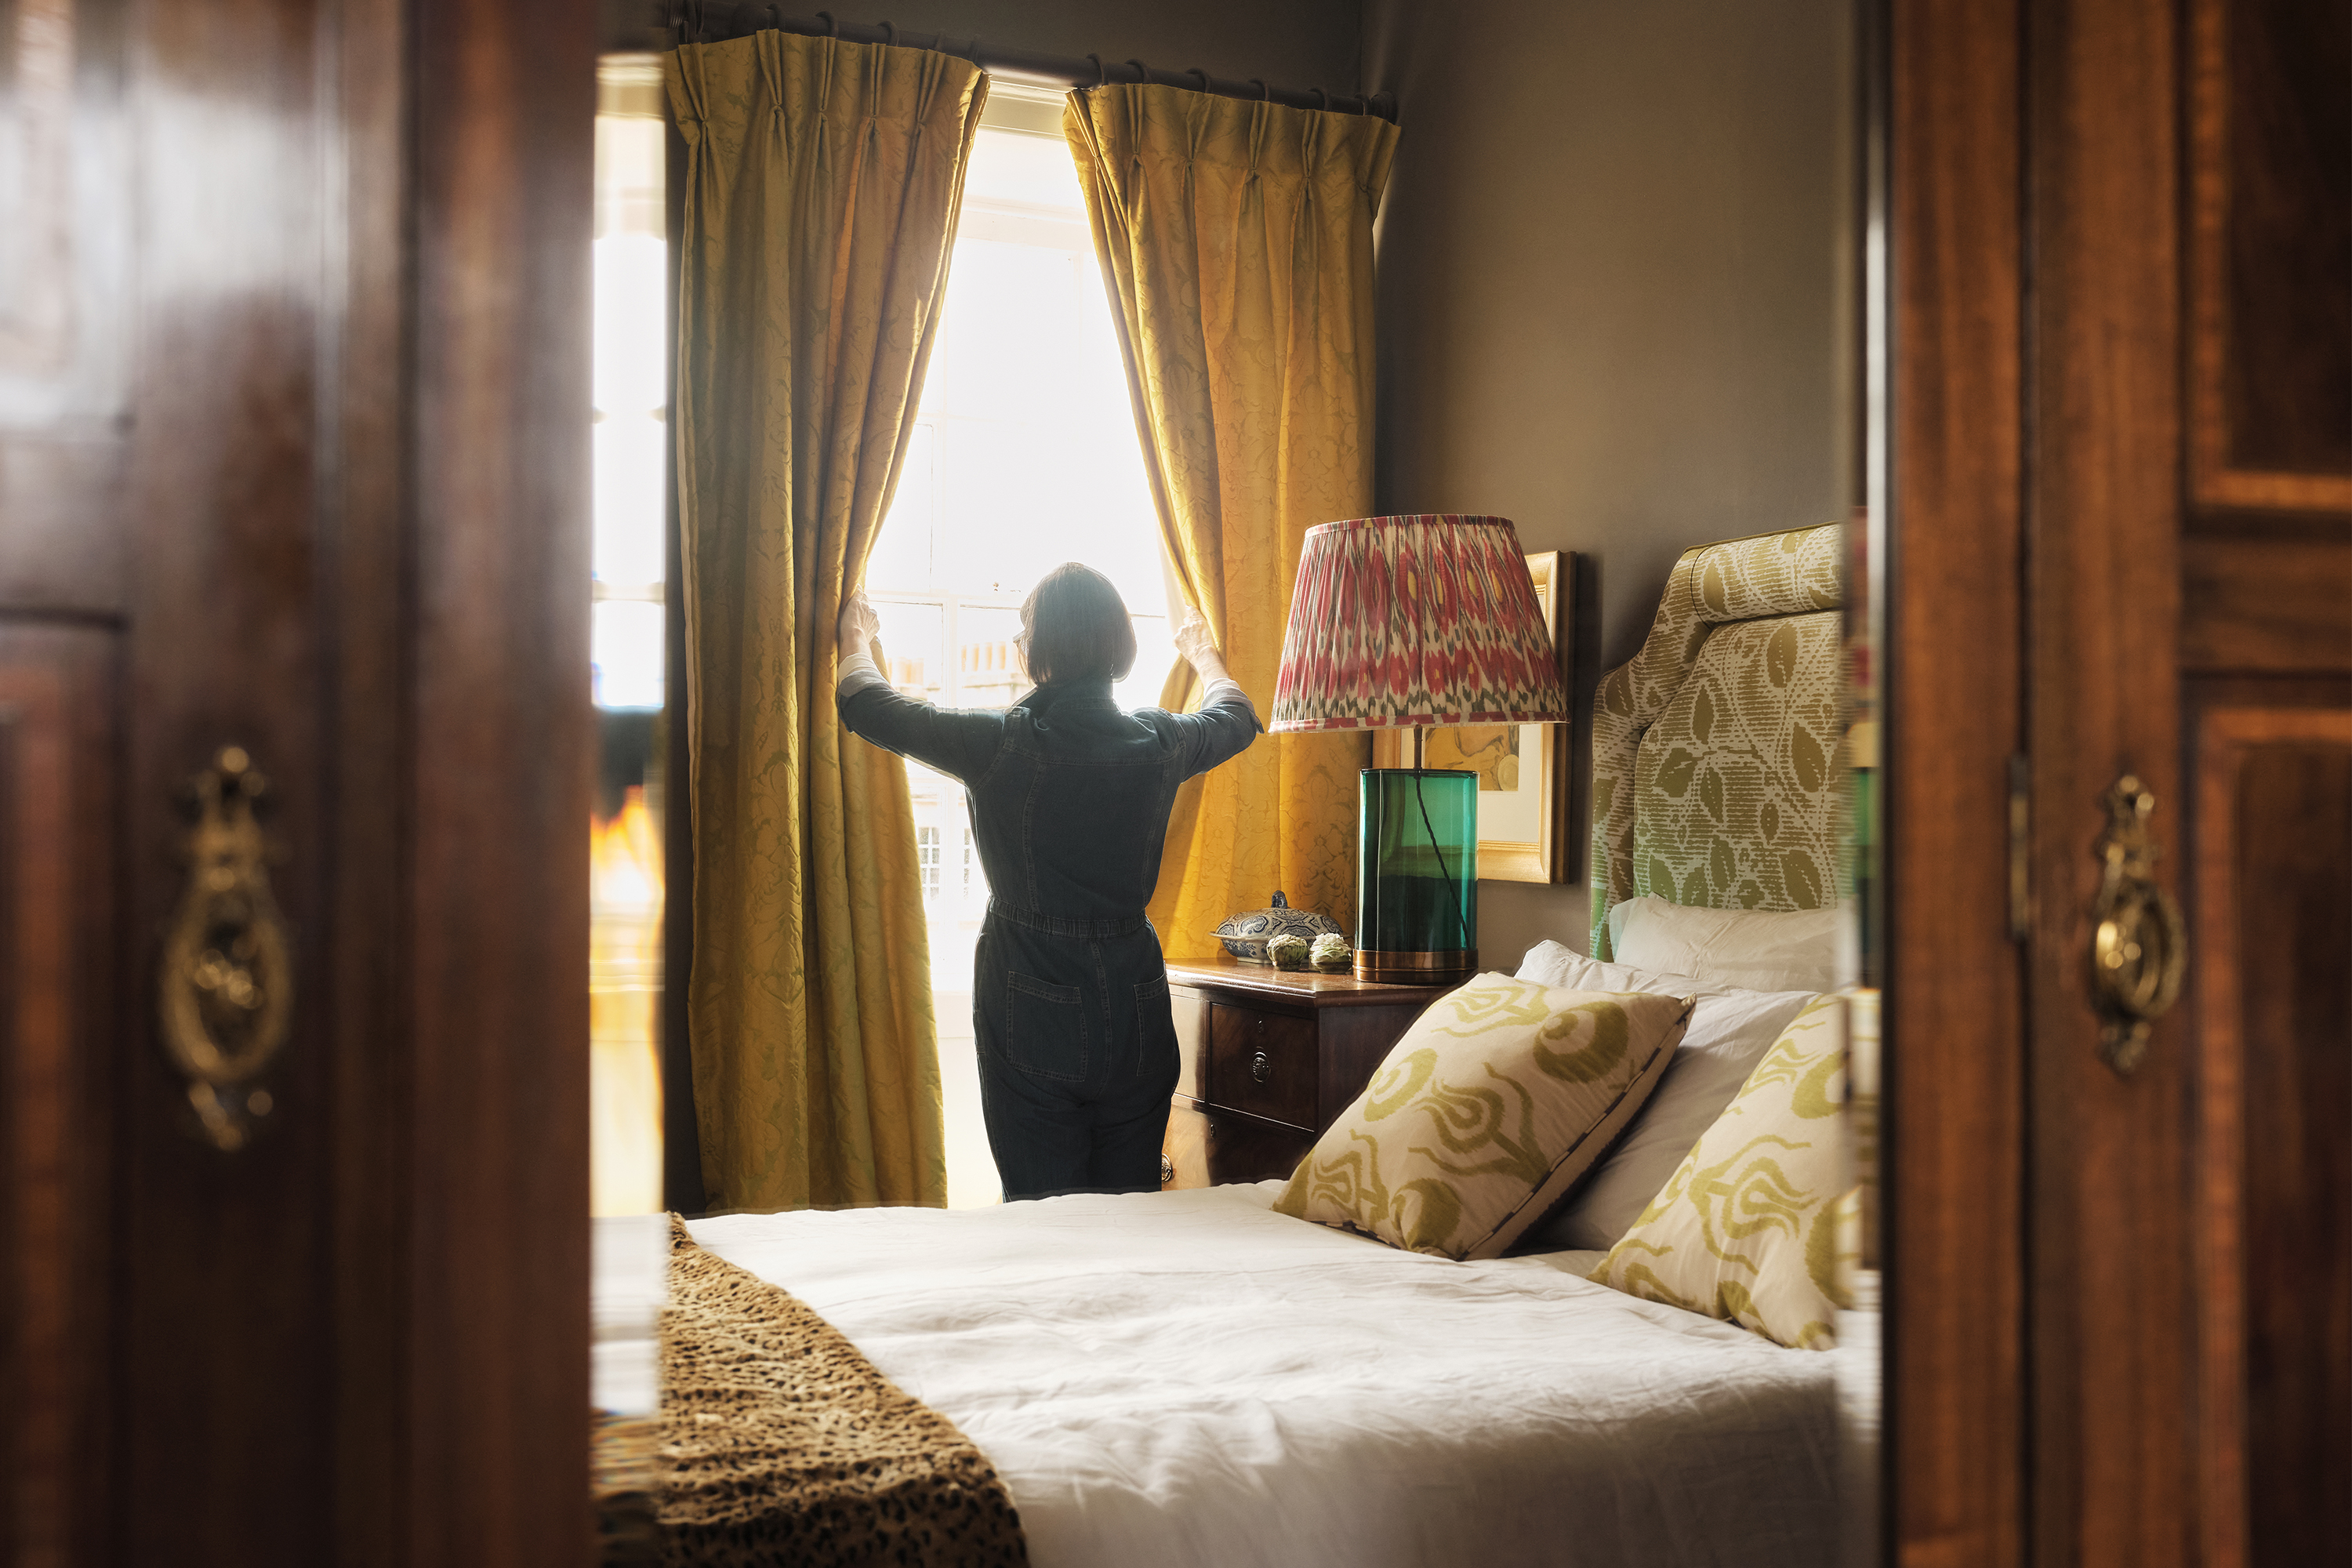 A woman opens the curtains and light pours into the bedroom of her Airbnb listing.